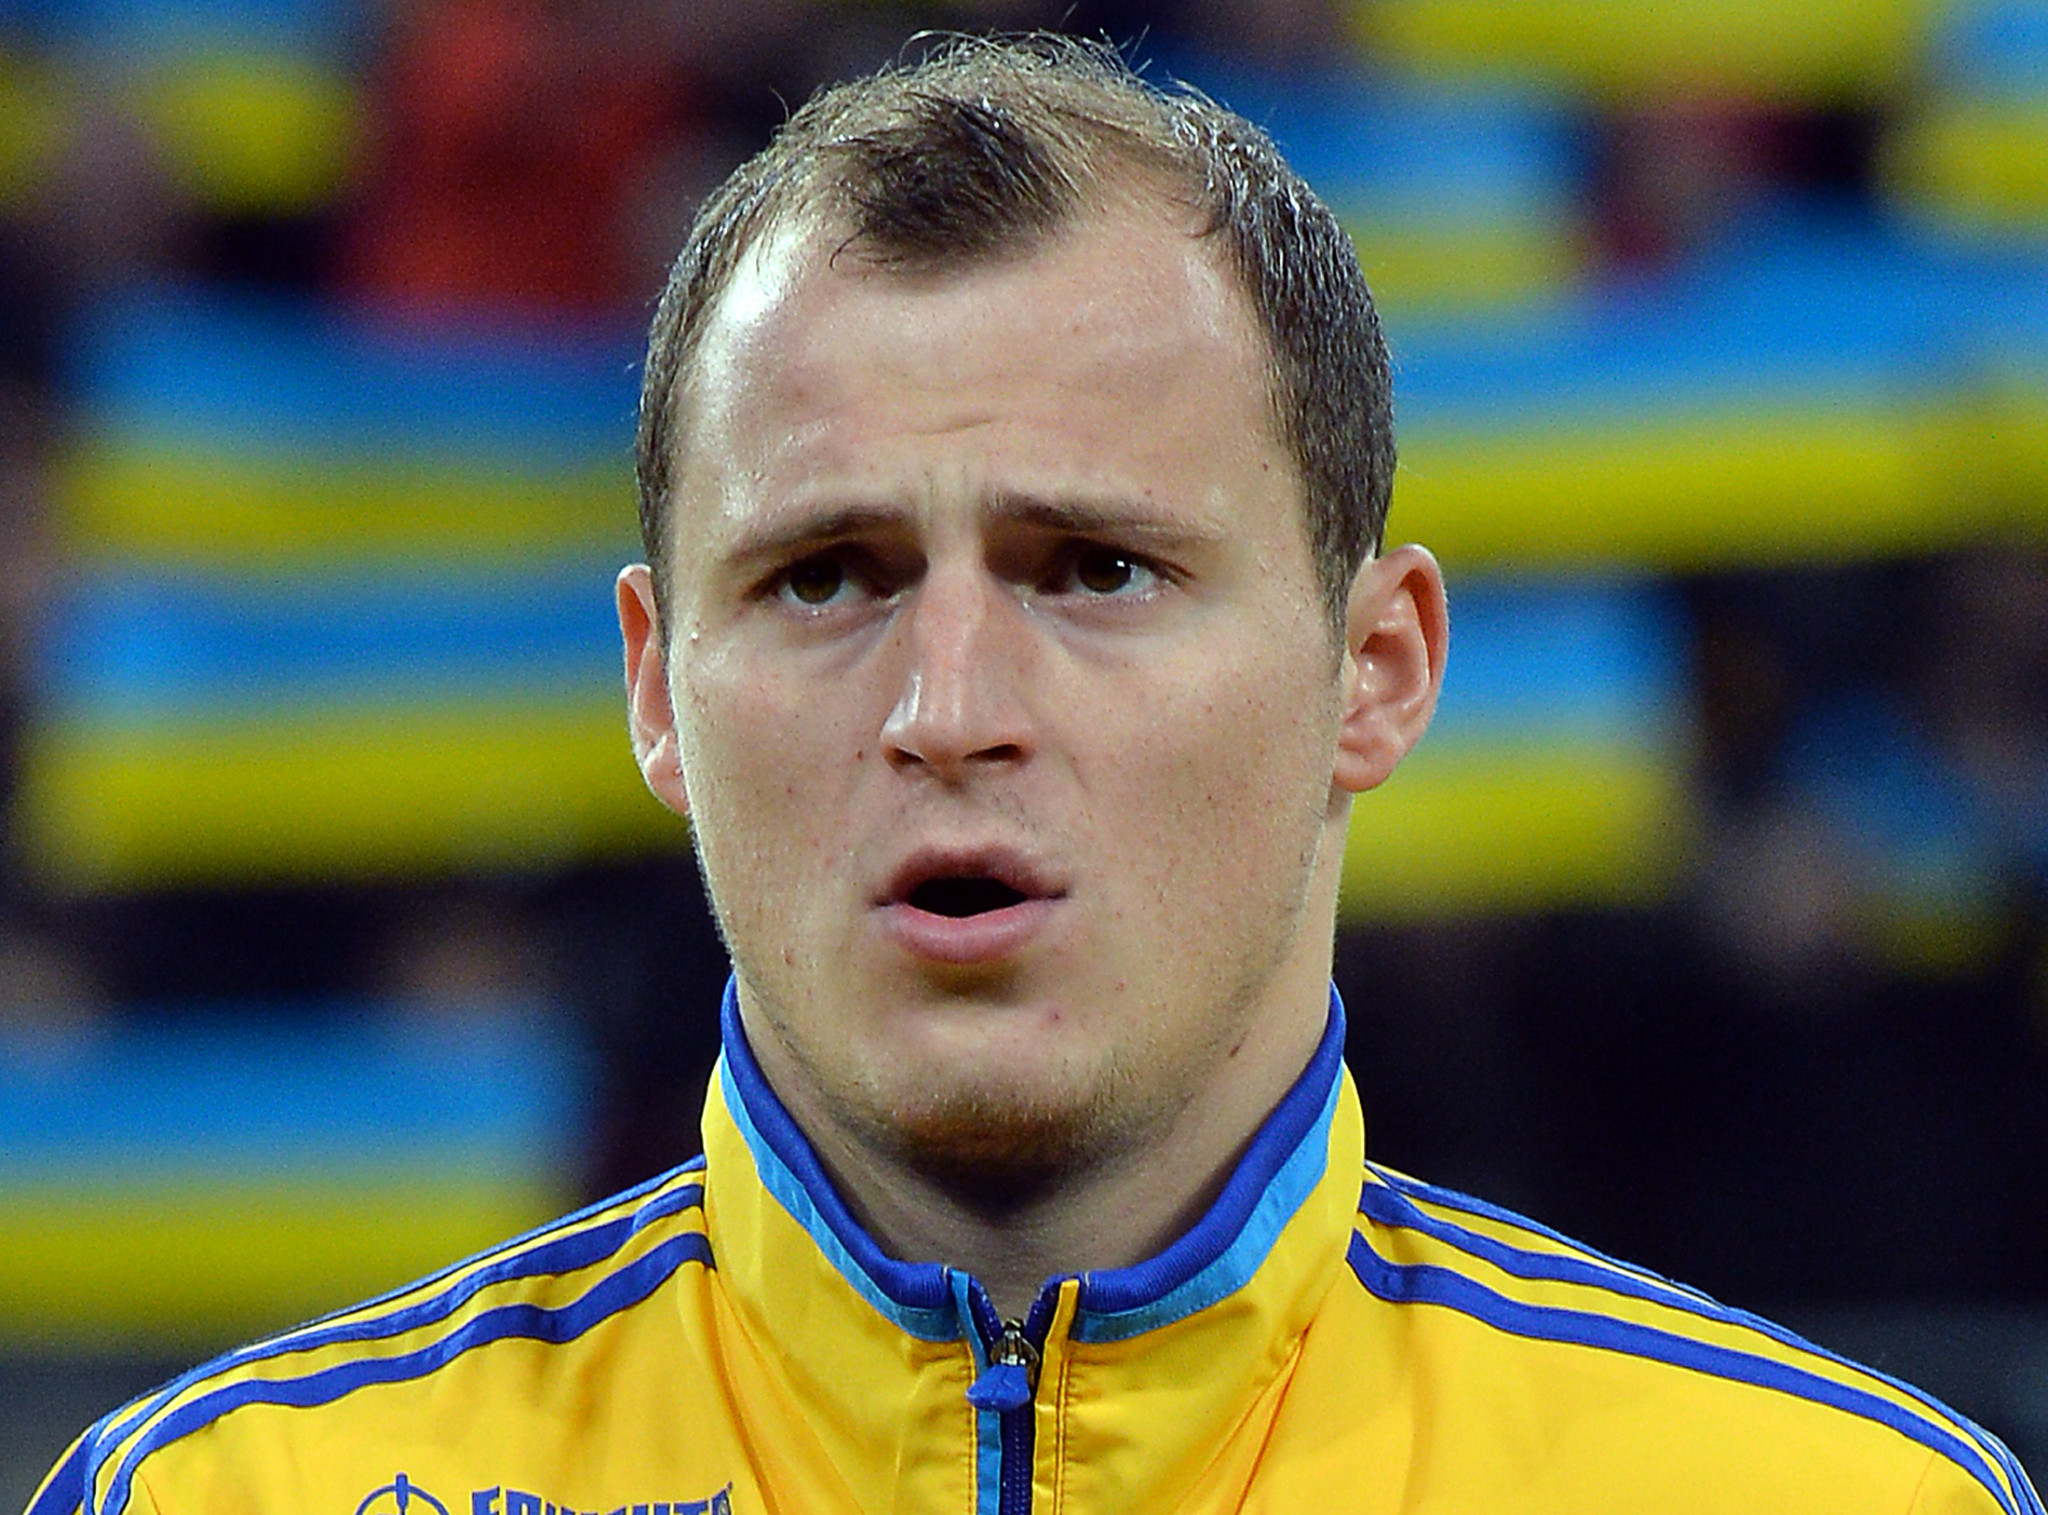 Roman Zozulya has aired his concerns over the new composition of the National Olympic Committee of Ukraine ©Getty Images